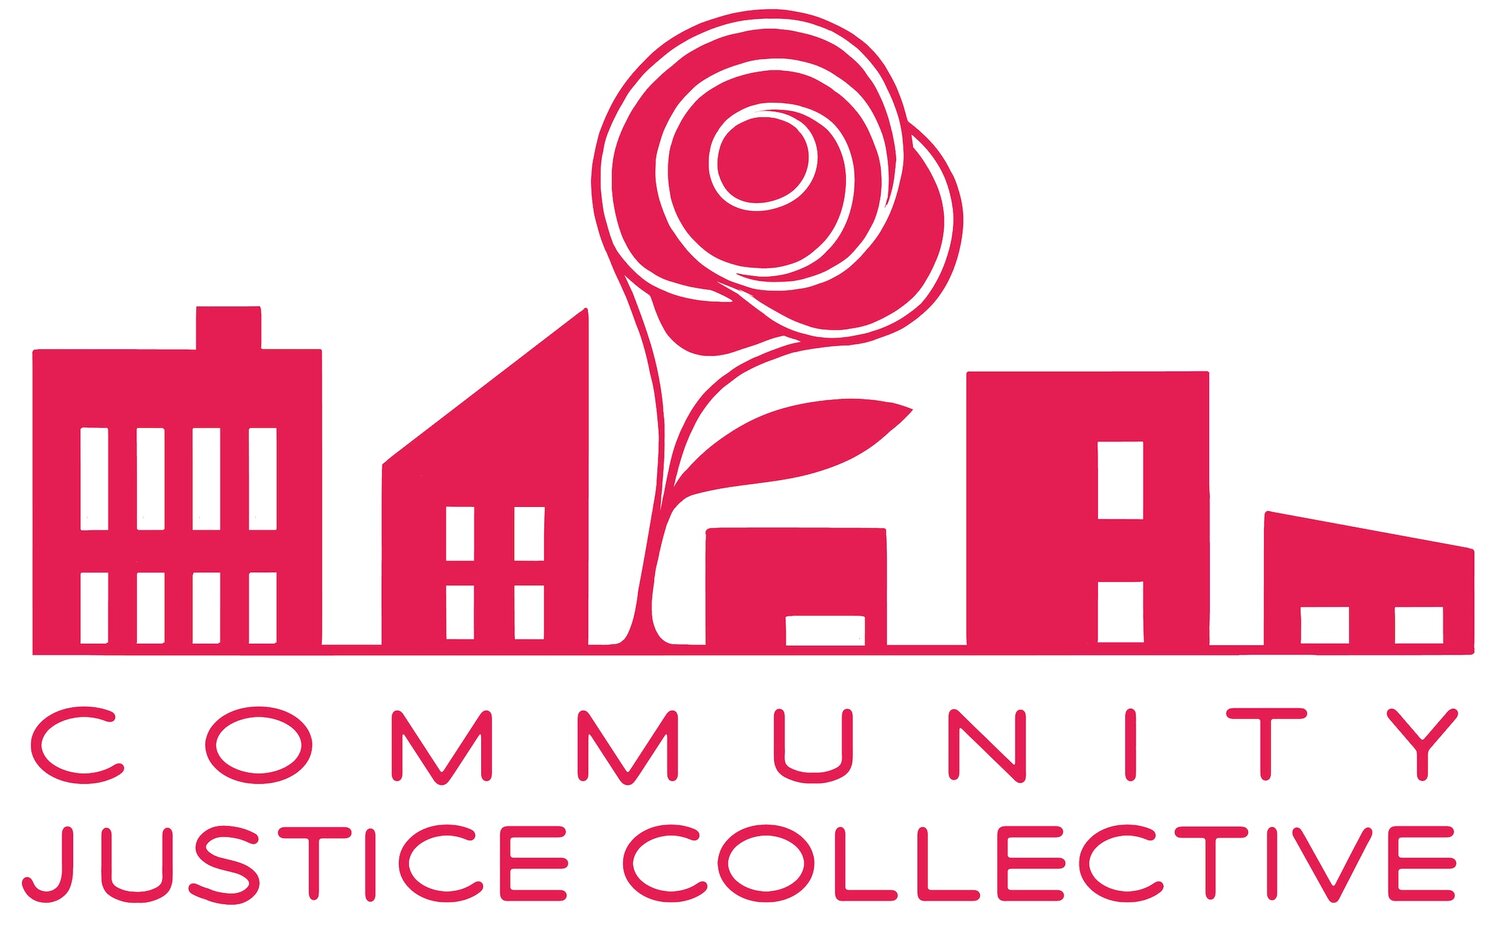 COMMUNITY JUSTICE COLLECTIVE